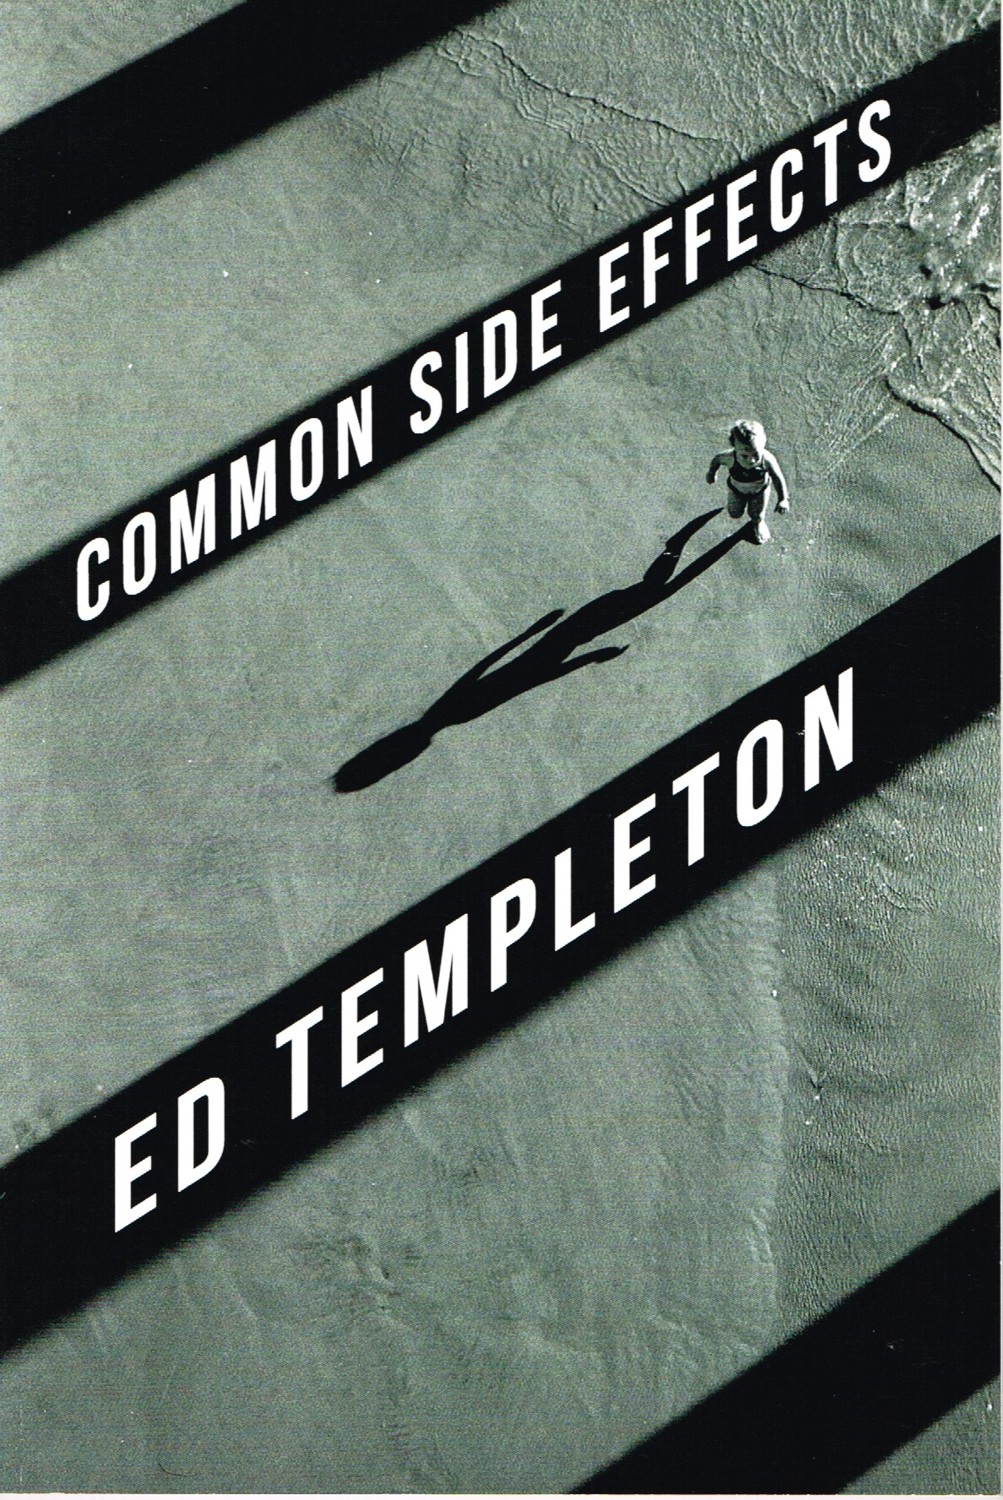 (TEMPLETON, ED). Templeton, Ed - ED TEMPLETON: COMMON SIDE EFFECTS - SIGNED WITH A SMALL DRAWING BY THE PHOTOGRAPHER